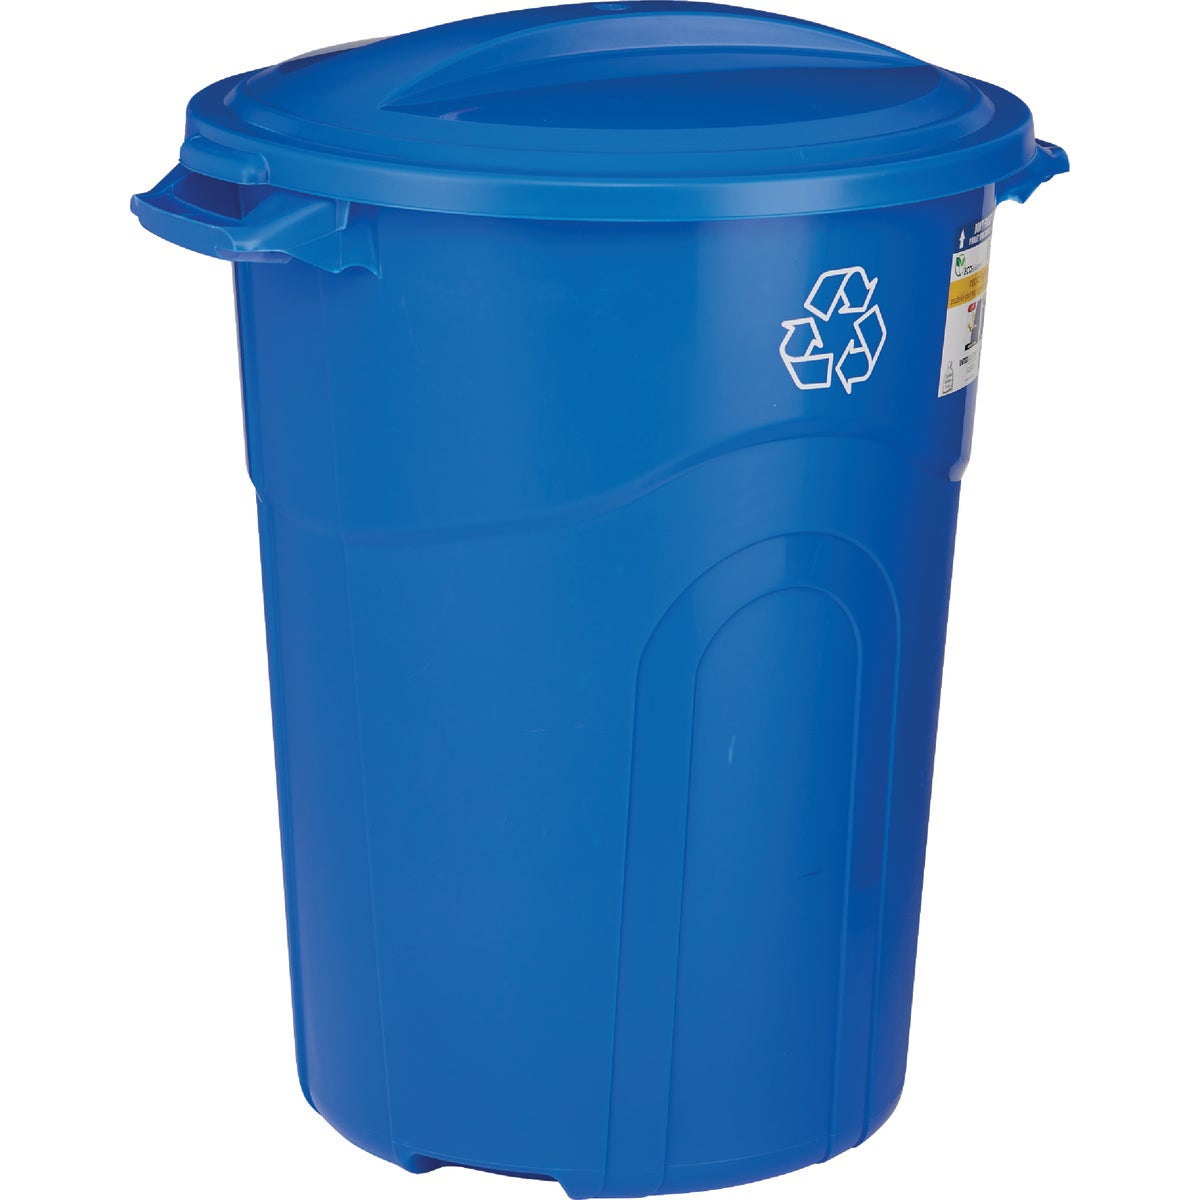 United Solutions 32 Gal. Recycling Trash Can with Lid